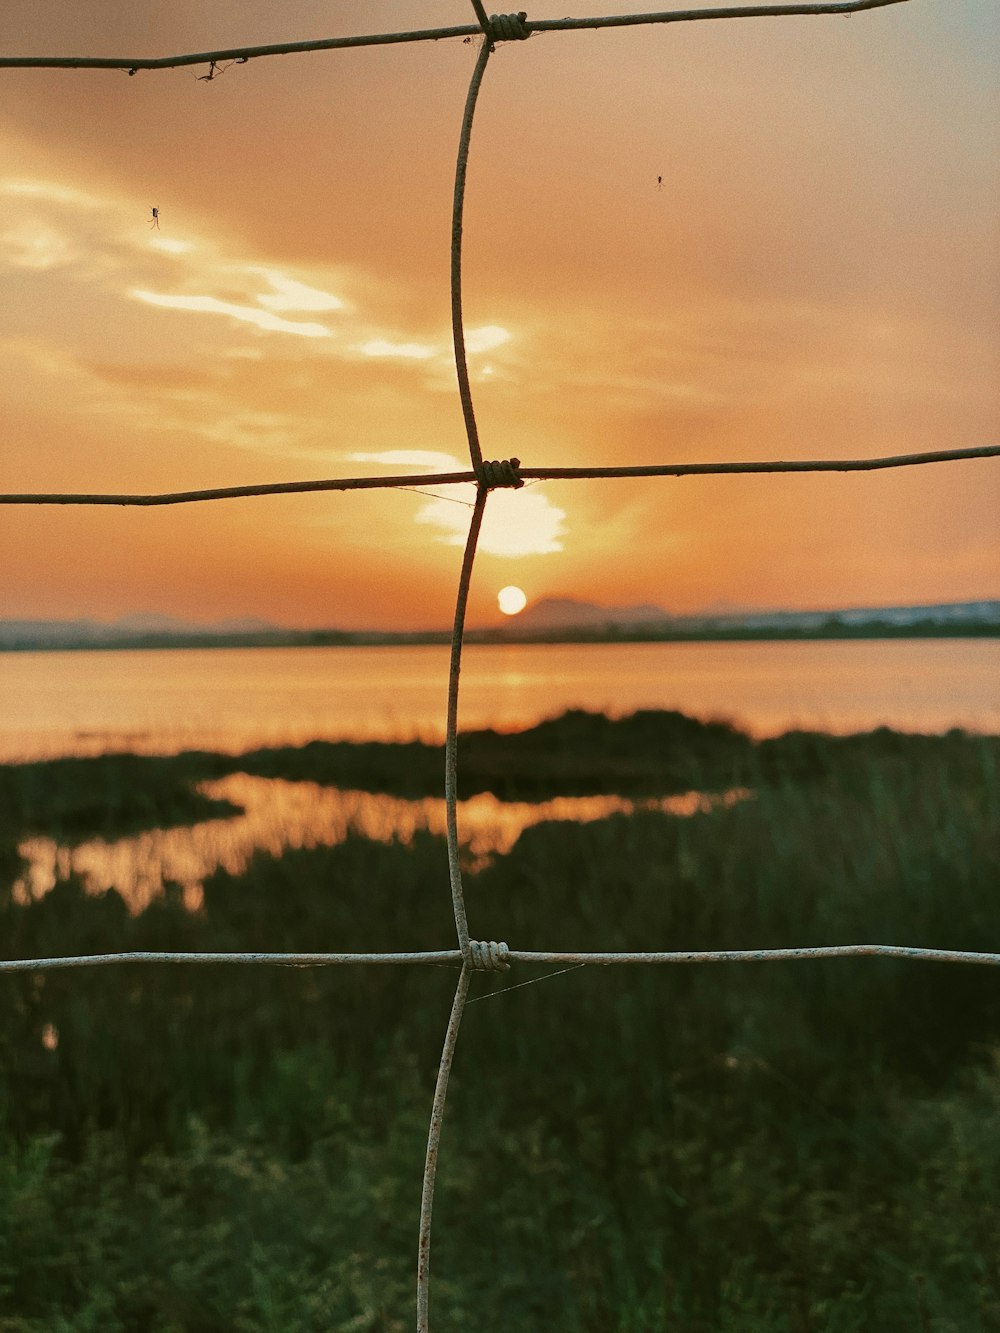 white barbwire fence near green grass field during sunset